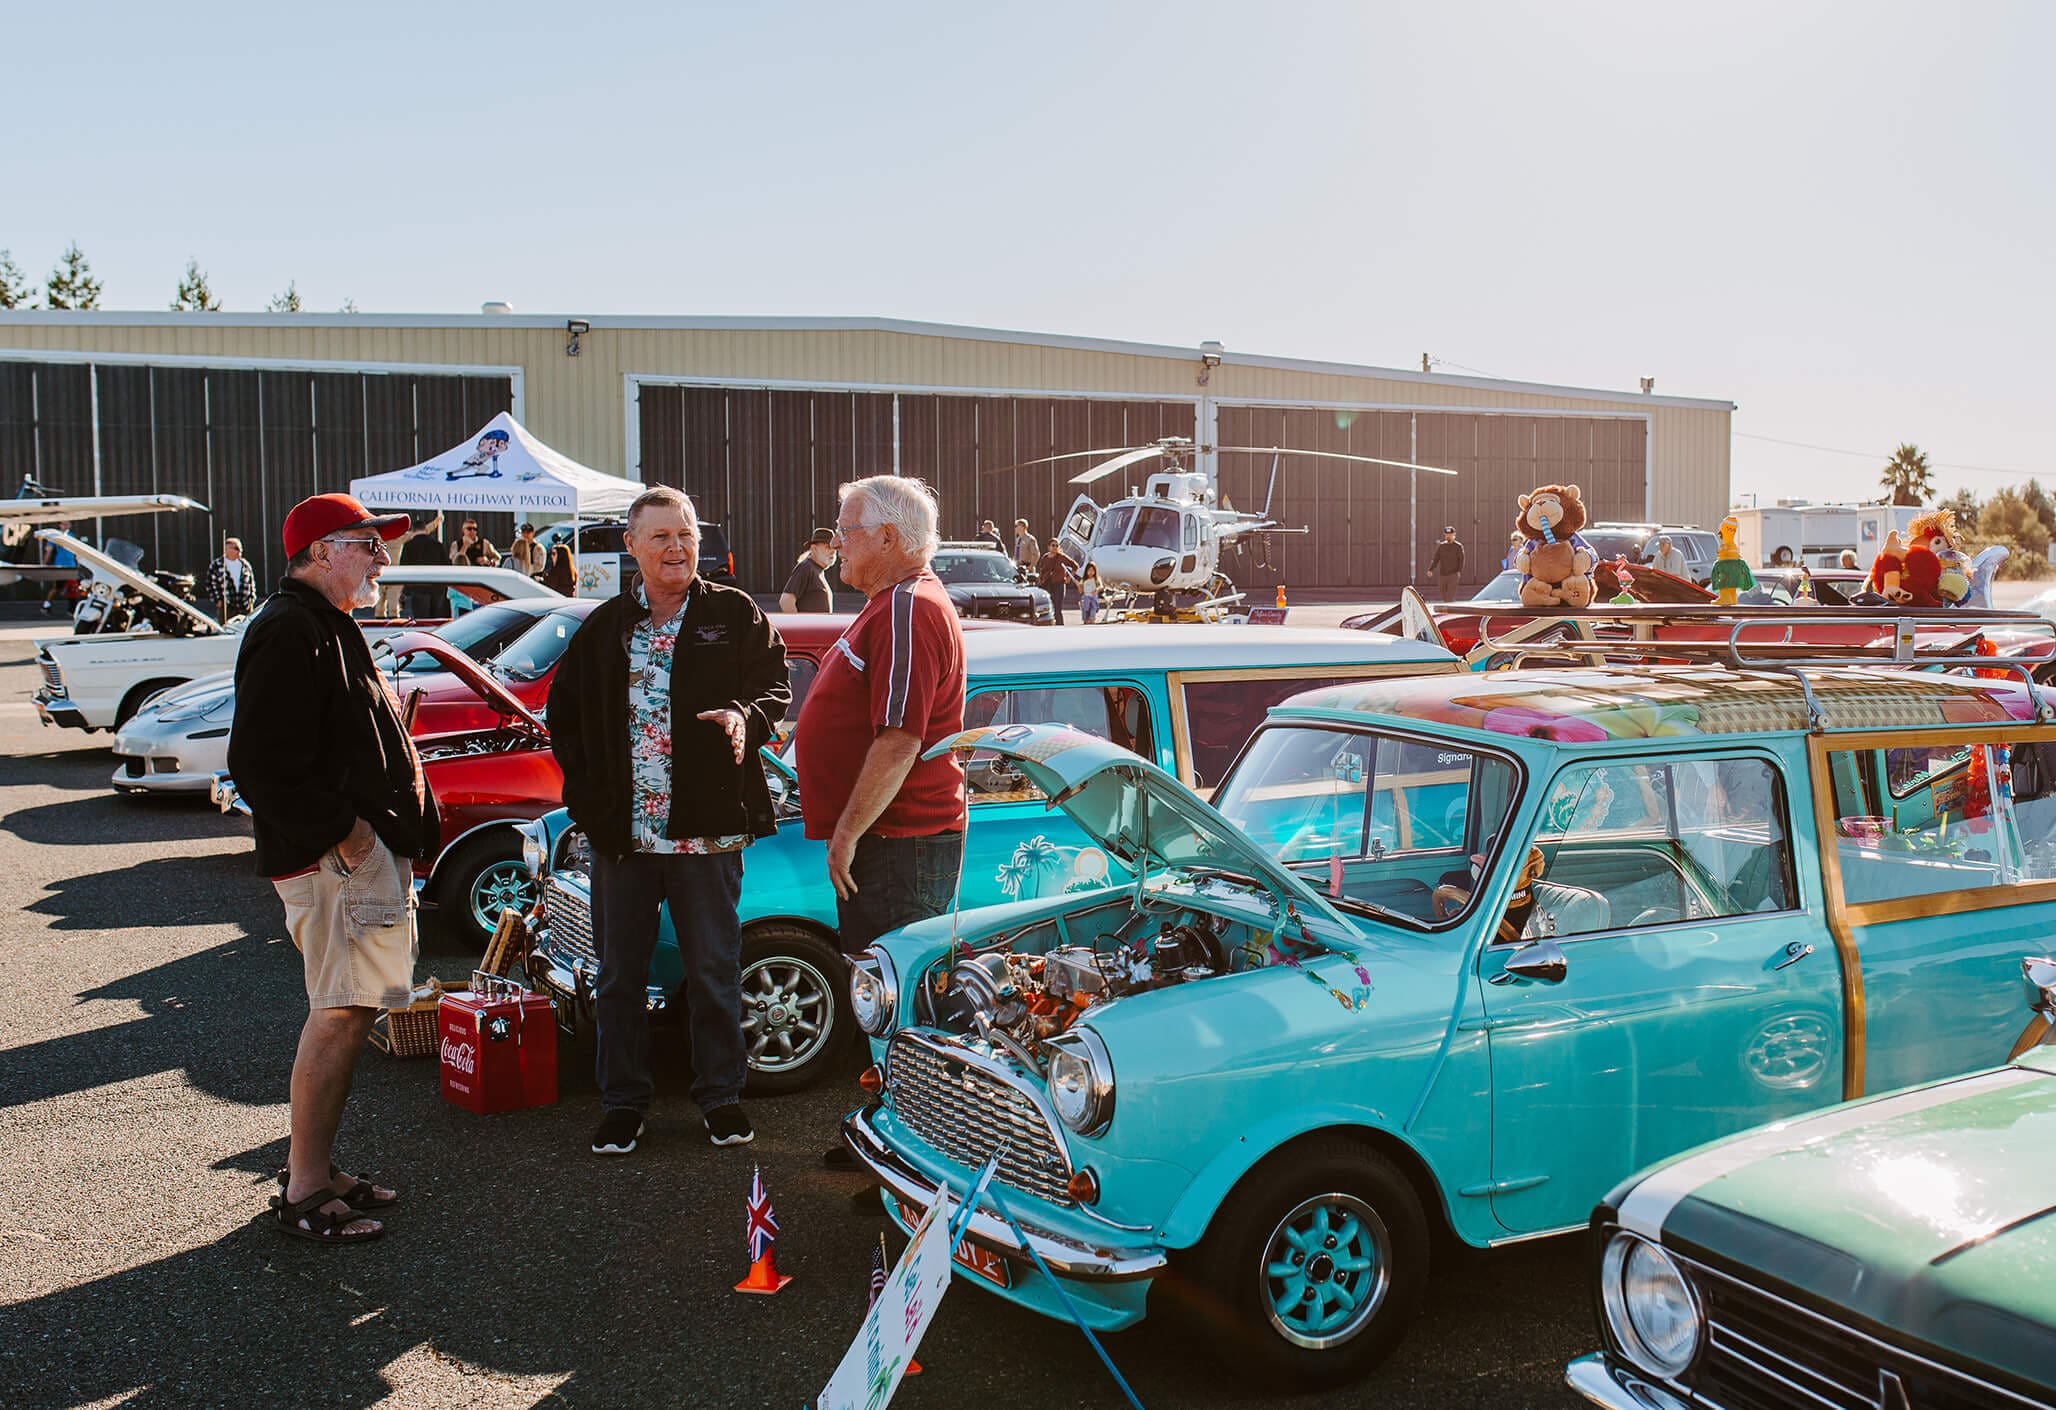 A group of older gentlemen stand and chat aside their vintage automobiles at a car show in Redding